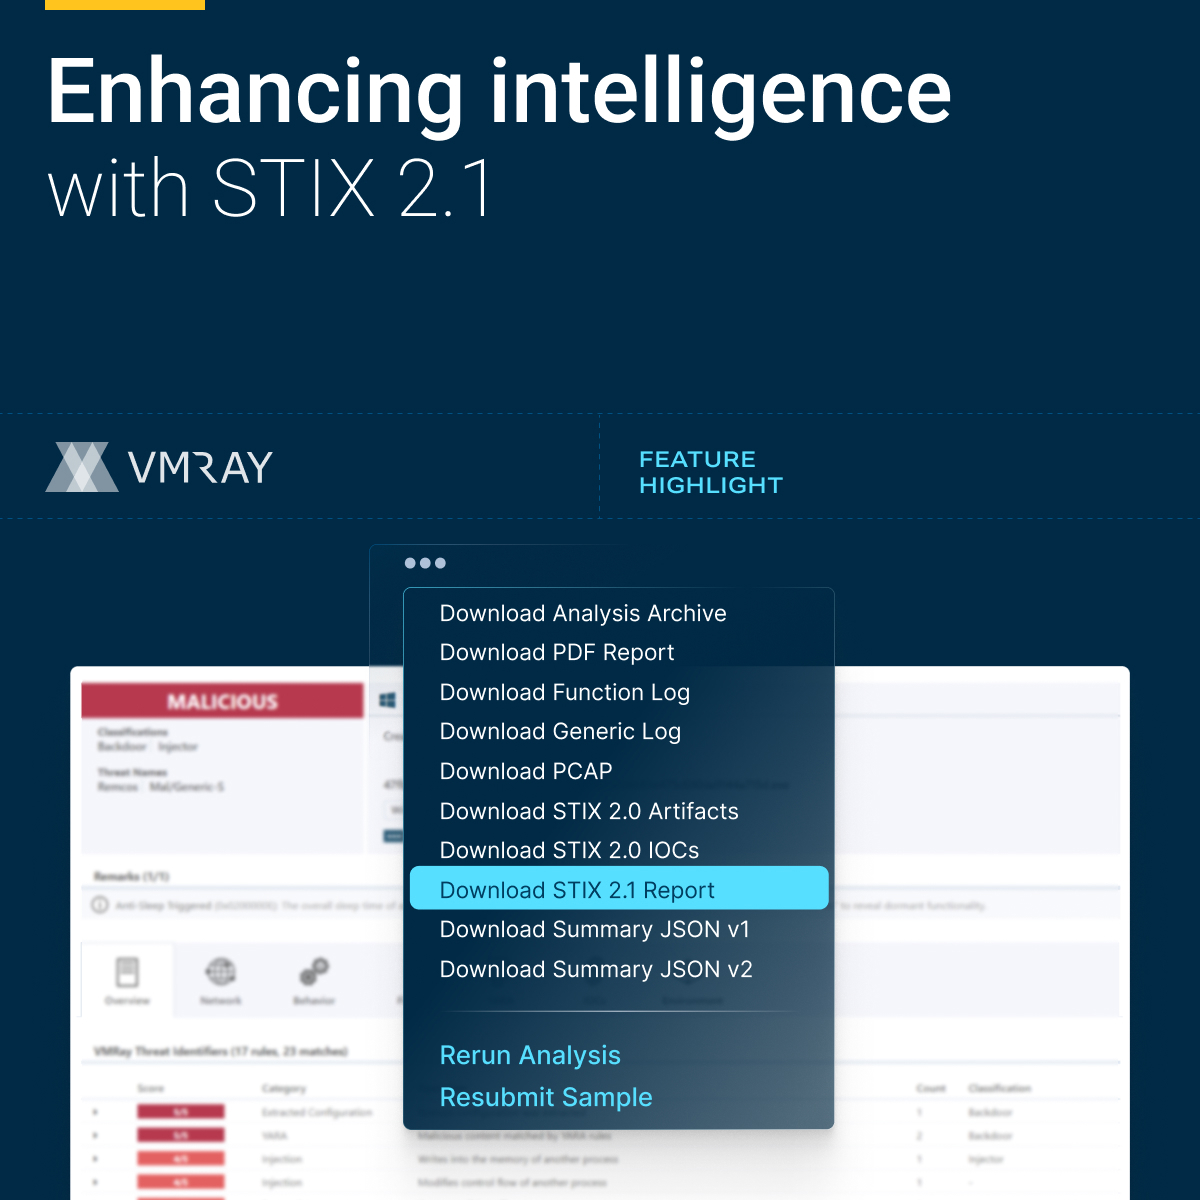 🚀 Exciting News! We're thrilled to announce the launch of a game-changing feature in our latest release: support for the advanced data-exchange format, 'STIX 2.1'!  bit.ly/3vHcLsh

#ThreatIntelligence #STIX21